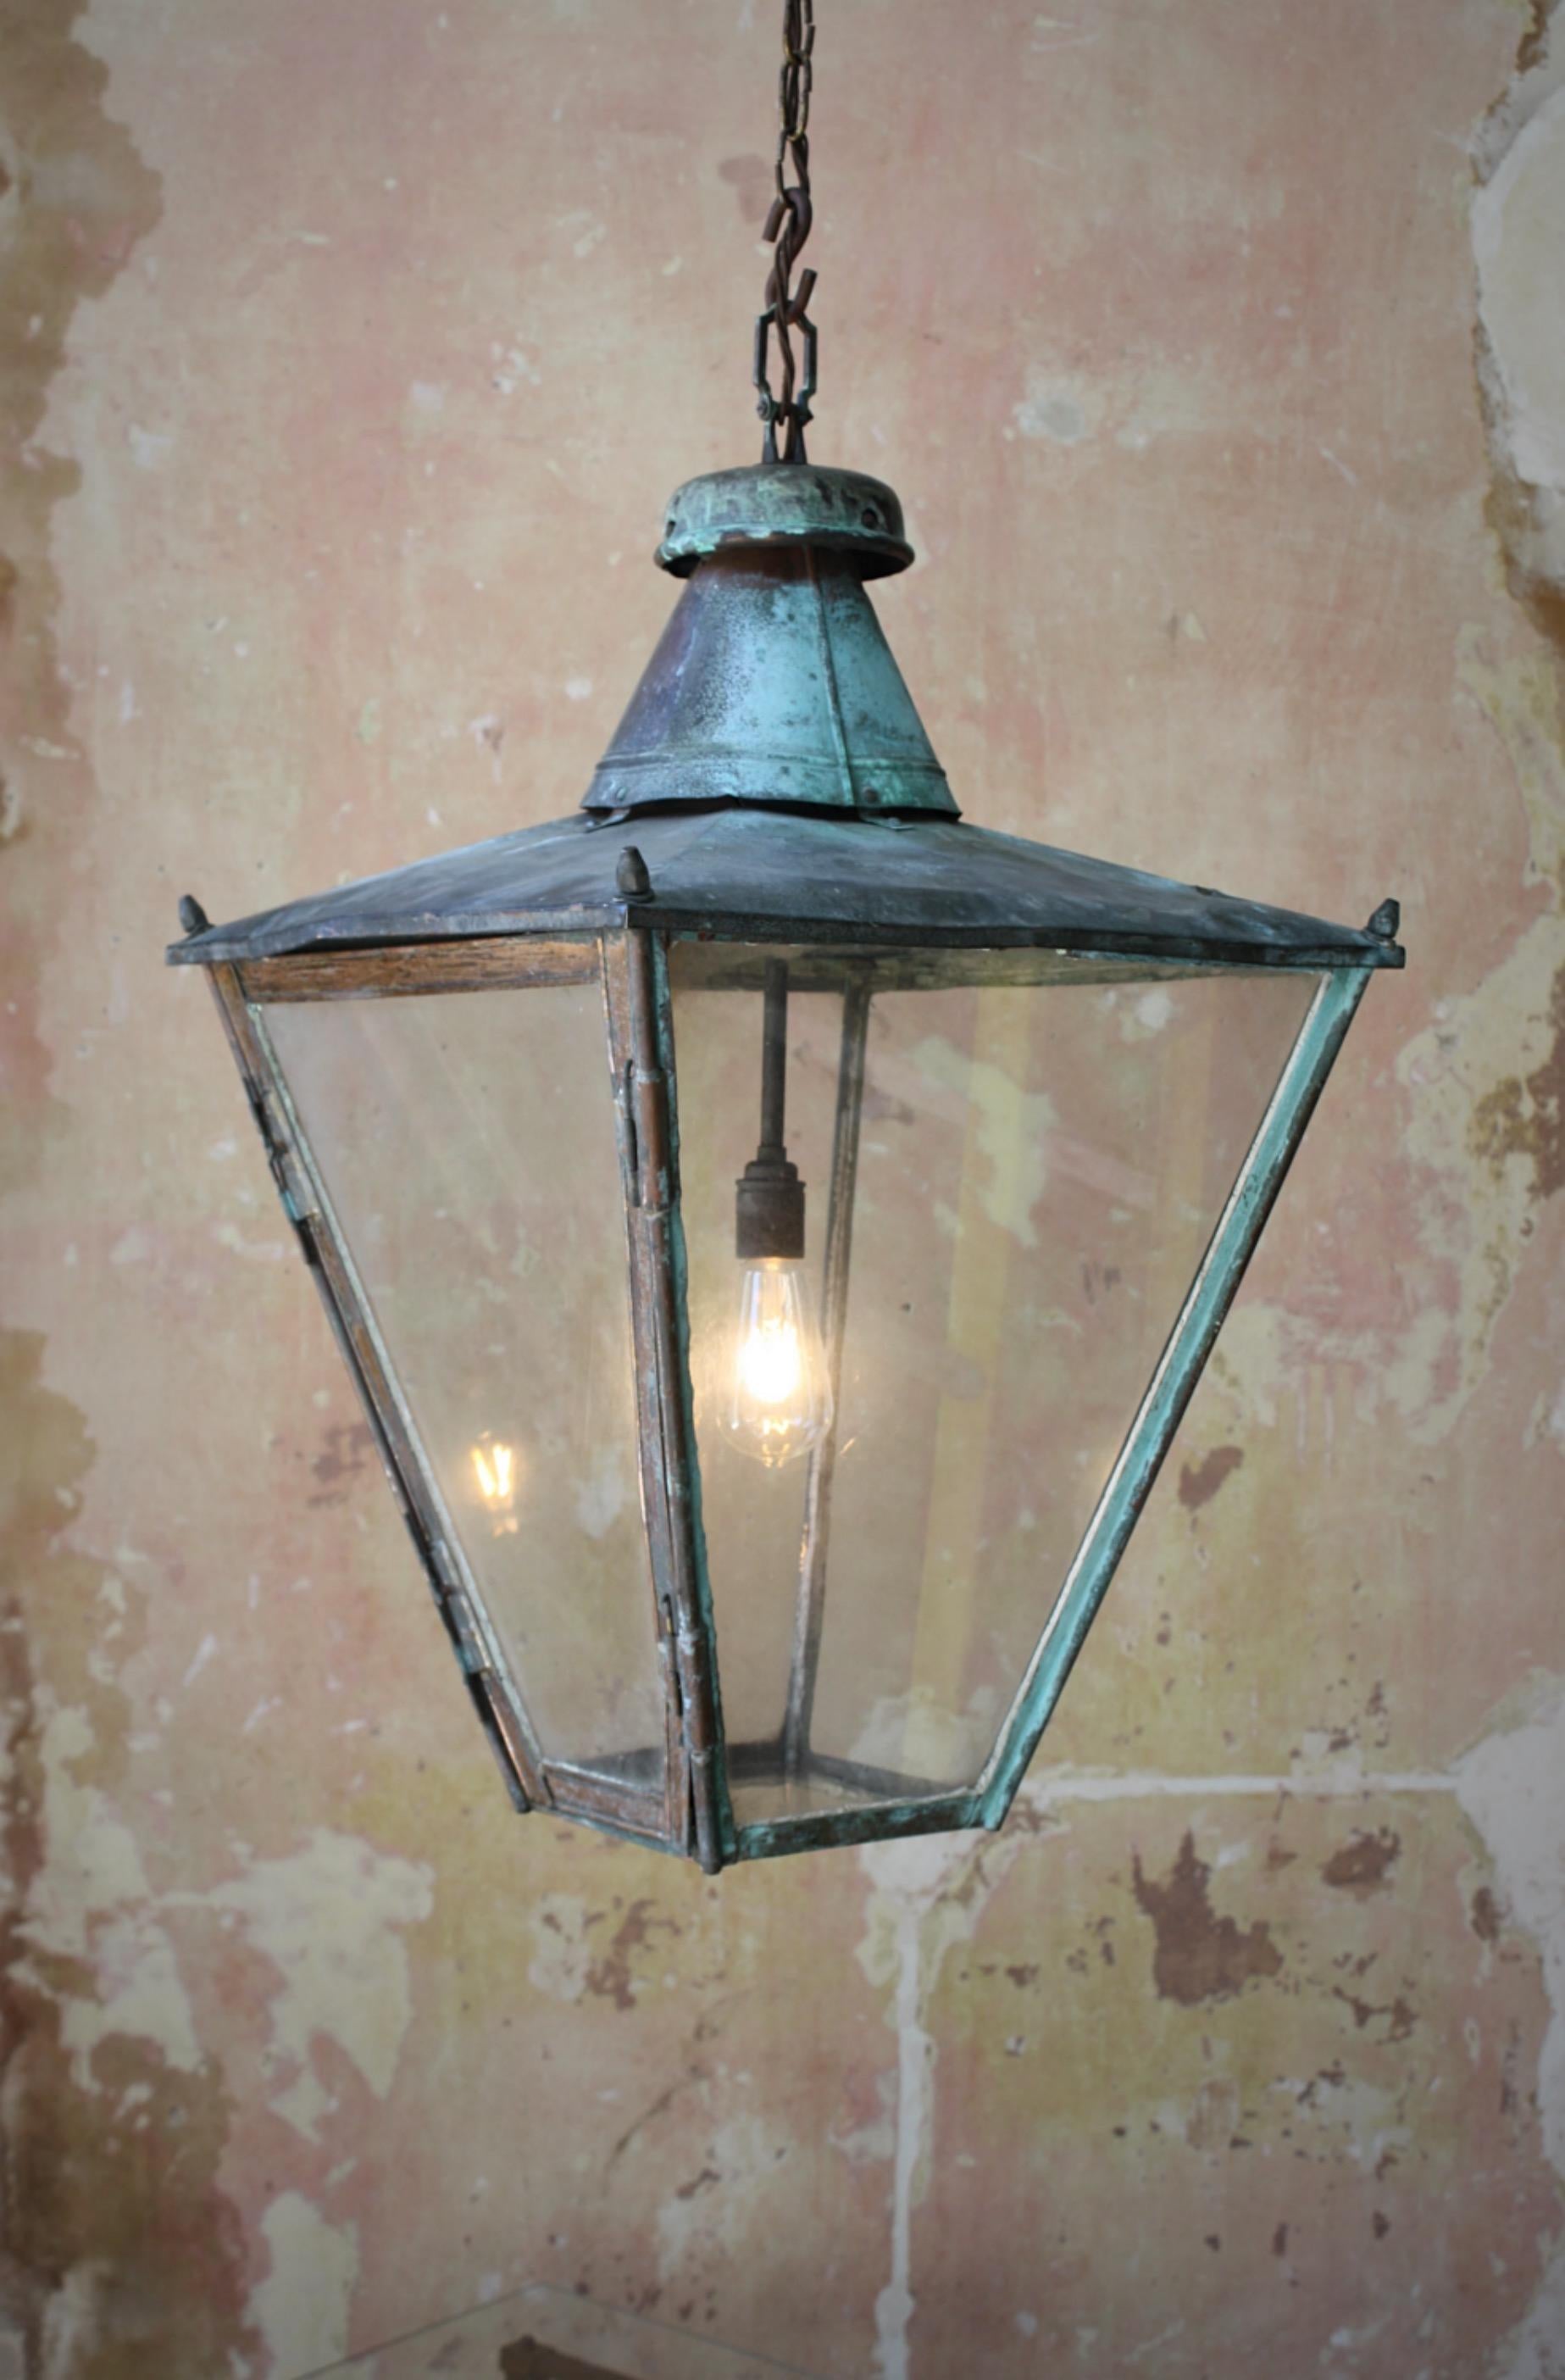 A larger than the norm, glazed and sheet copper hanging lantern with a natural verdigris finish.

Victorian with age related wear, marks, dings and dents. 

Measures: 83cm in drop, 48cm in depth & width.

Original chain length with the s hook